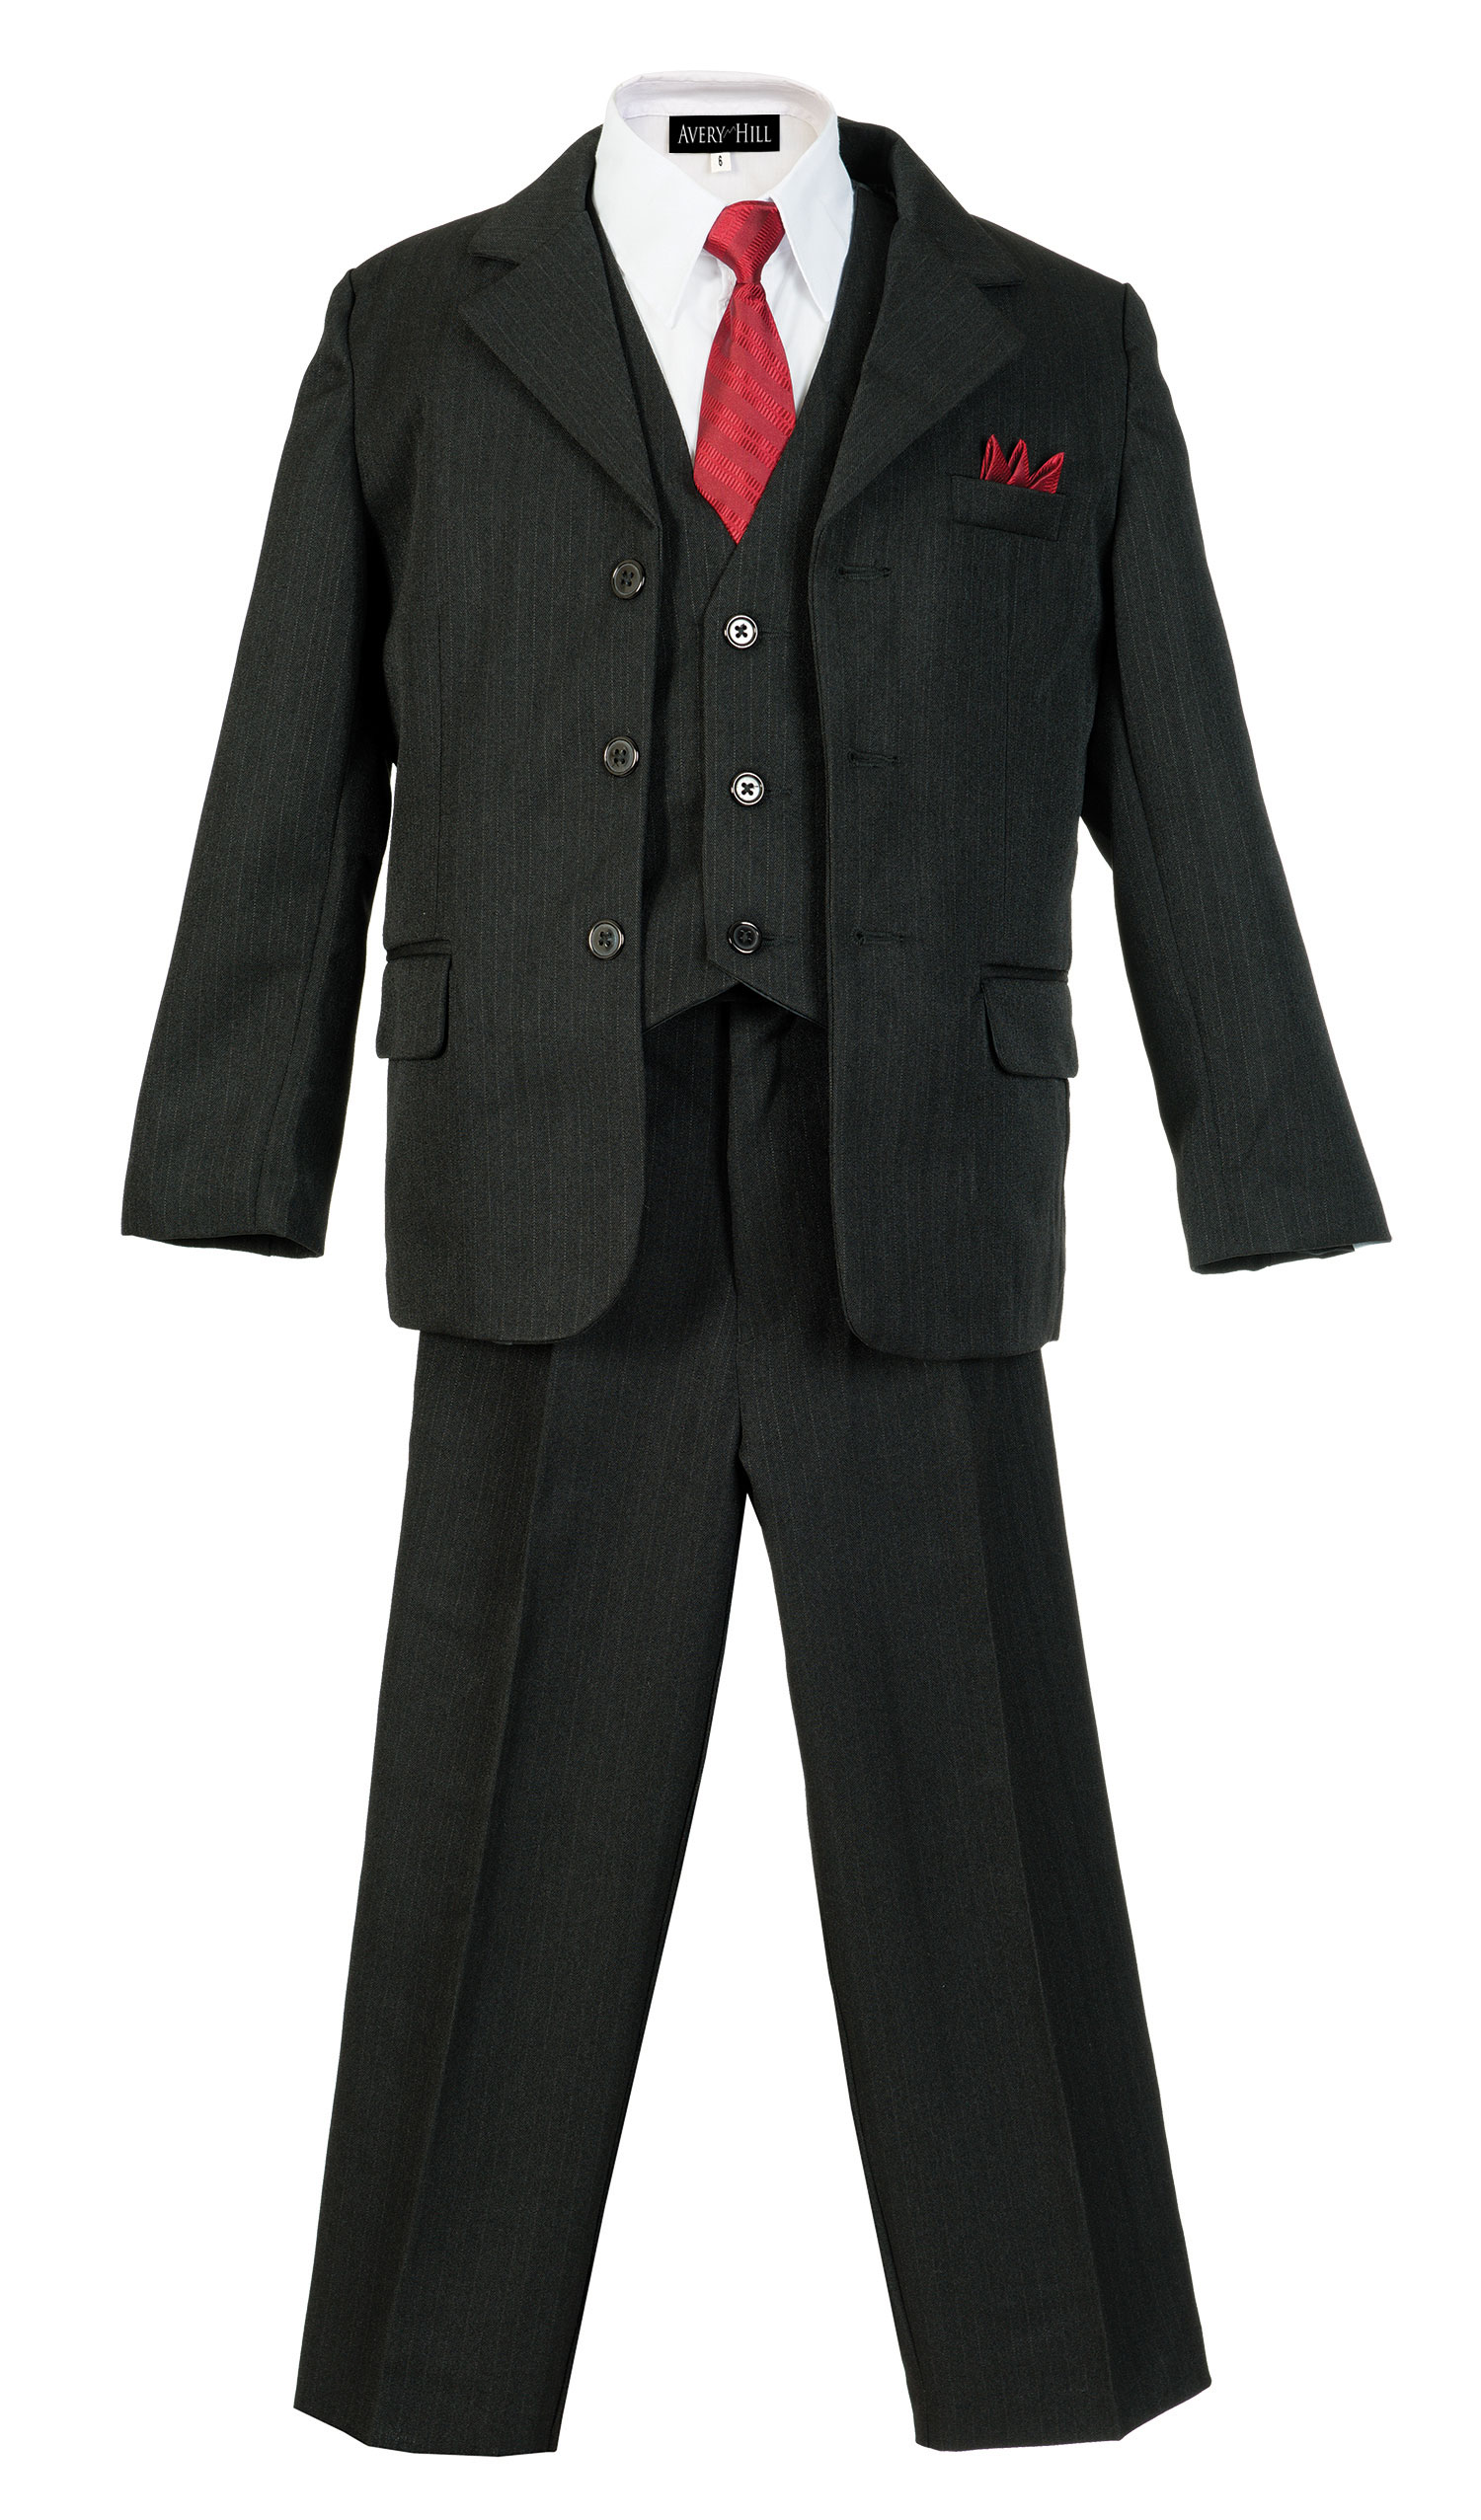 Boys Pinstripe Suit Set with Matching Tie BK 5